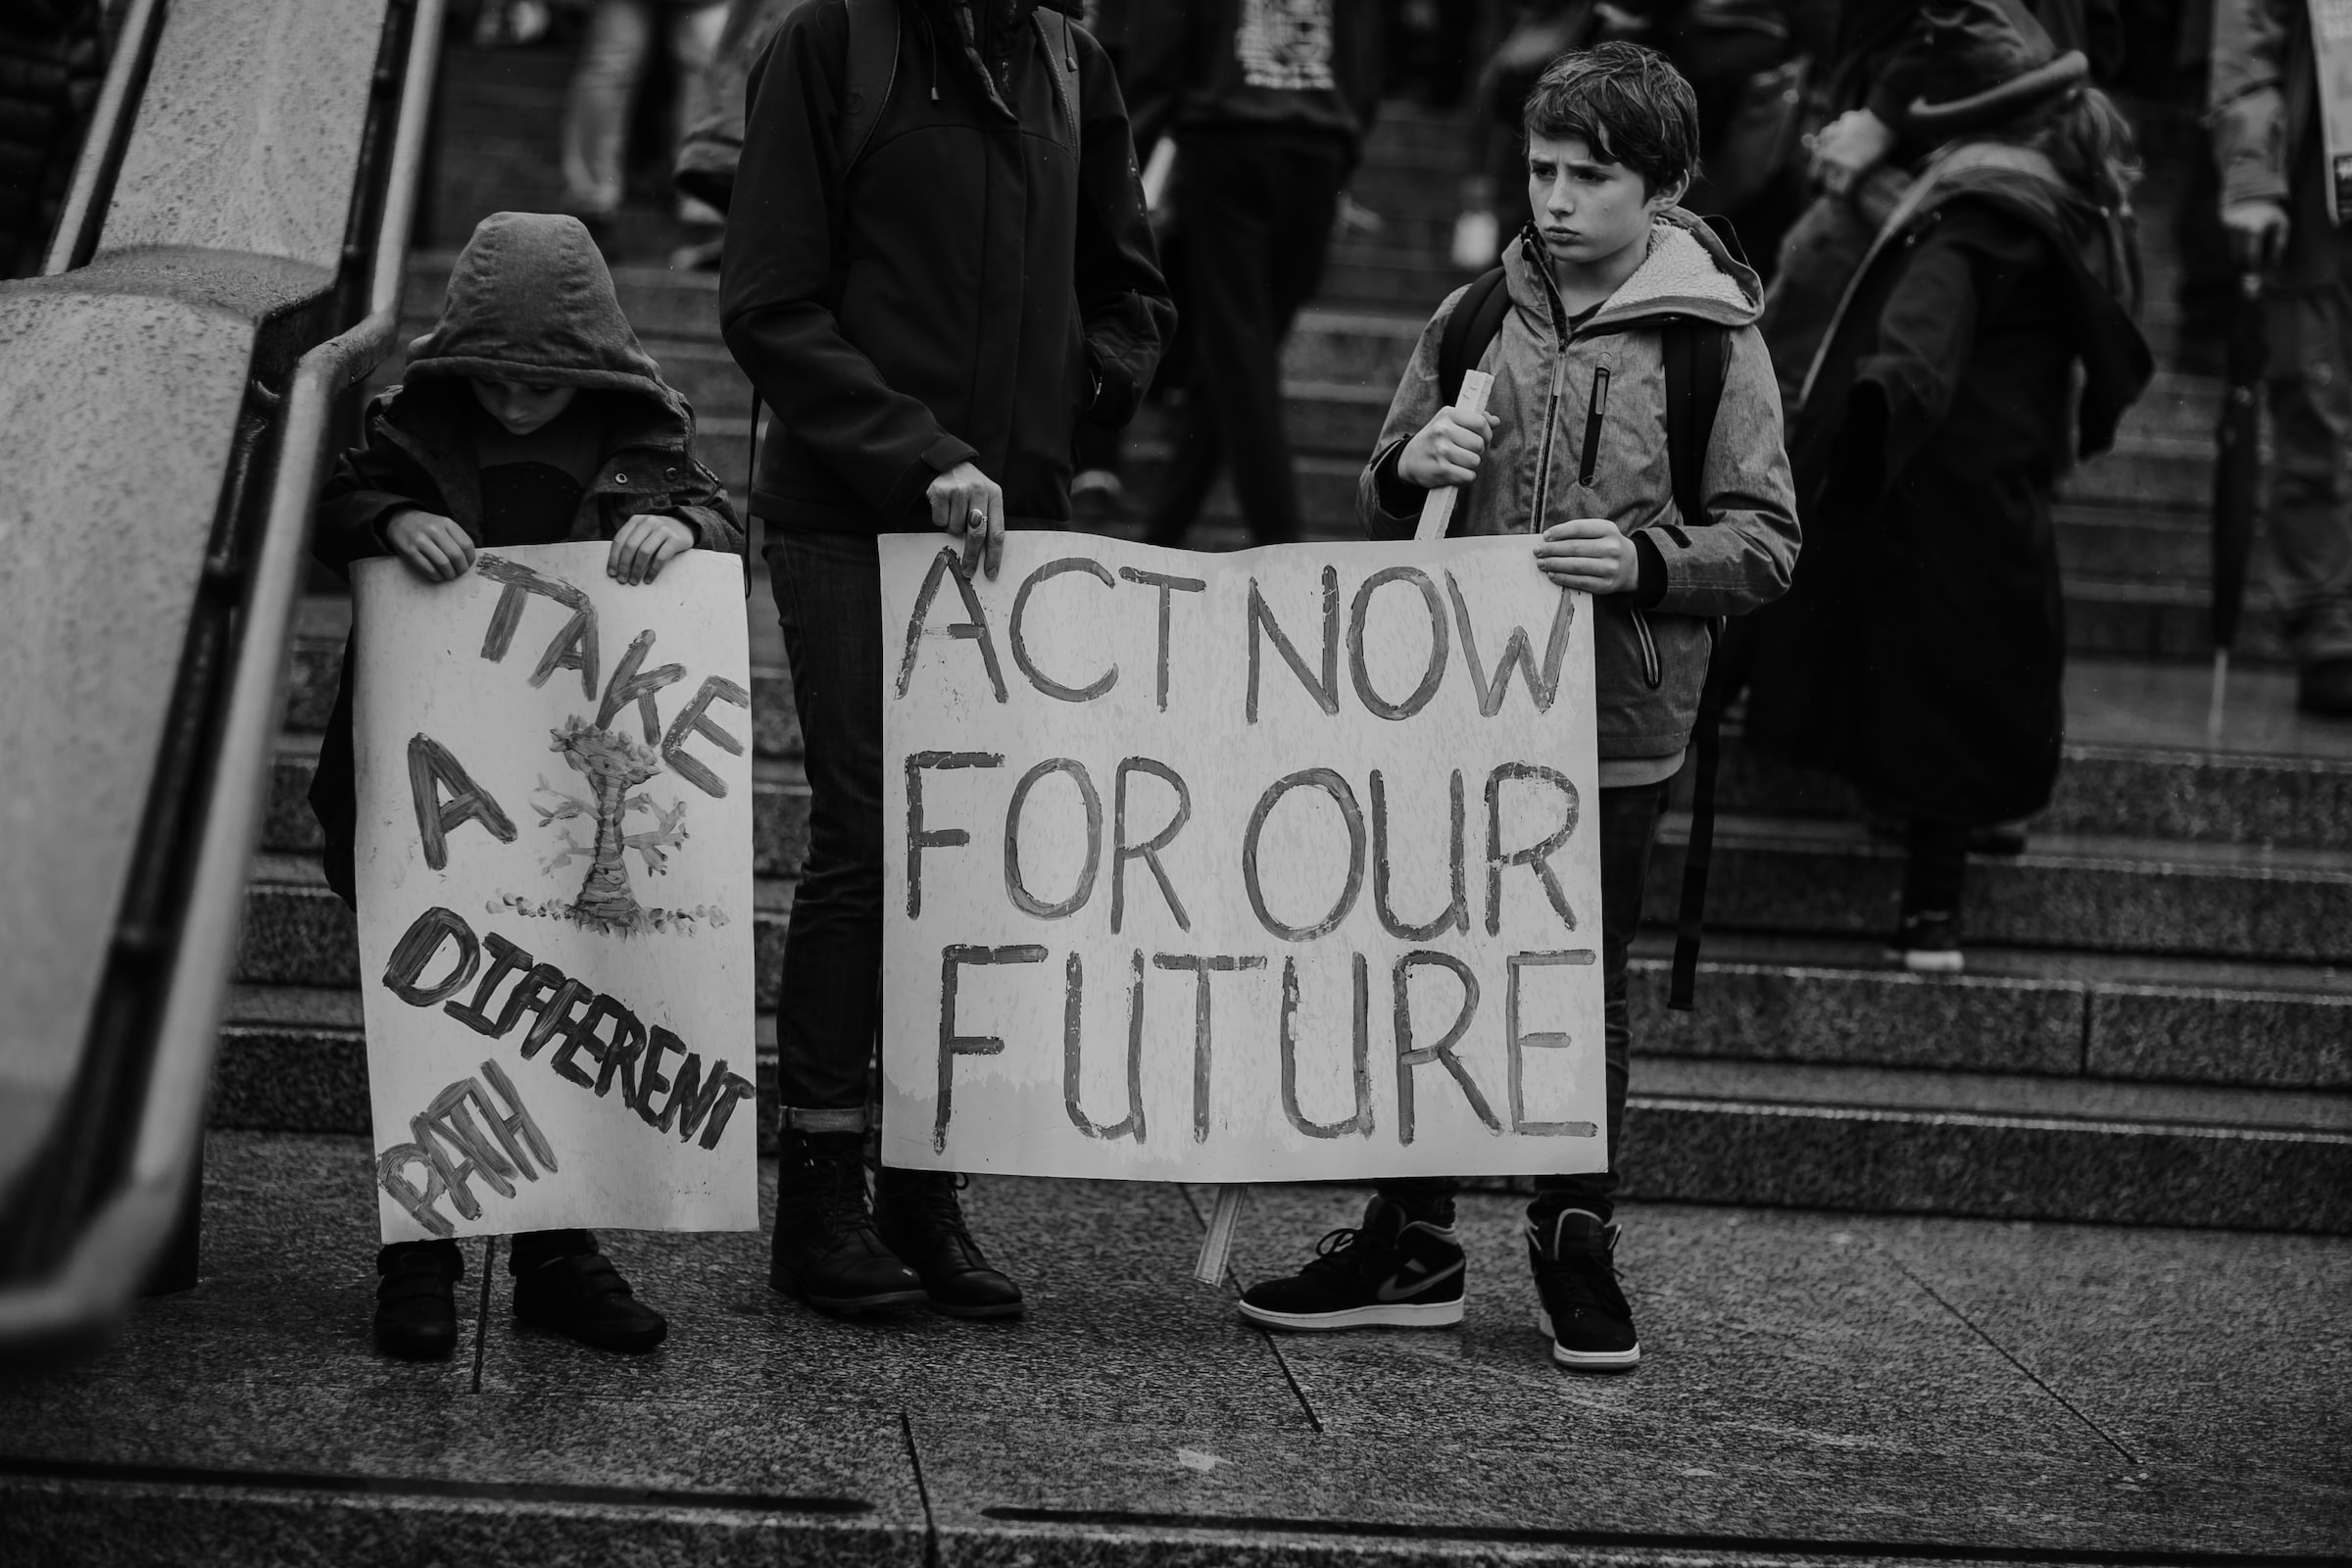 Children at Extinction Rebellion climate protests in London holding a sign saying 'Act now for our future'